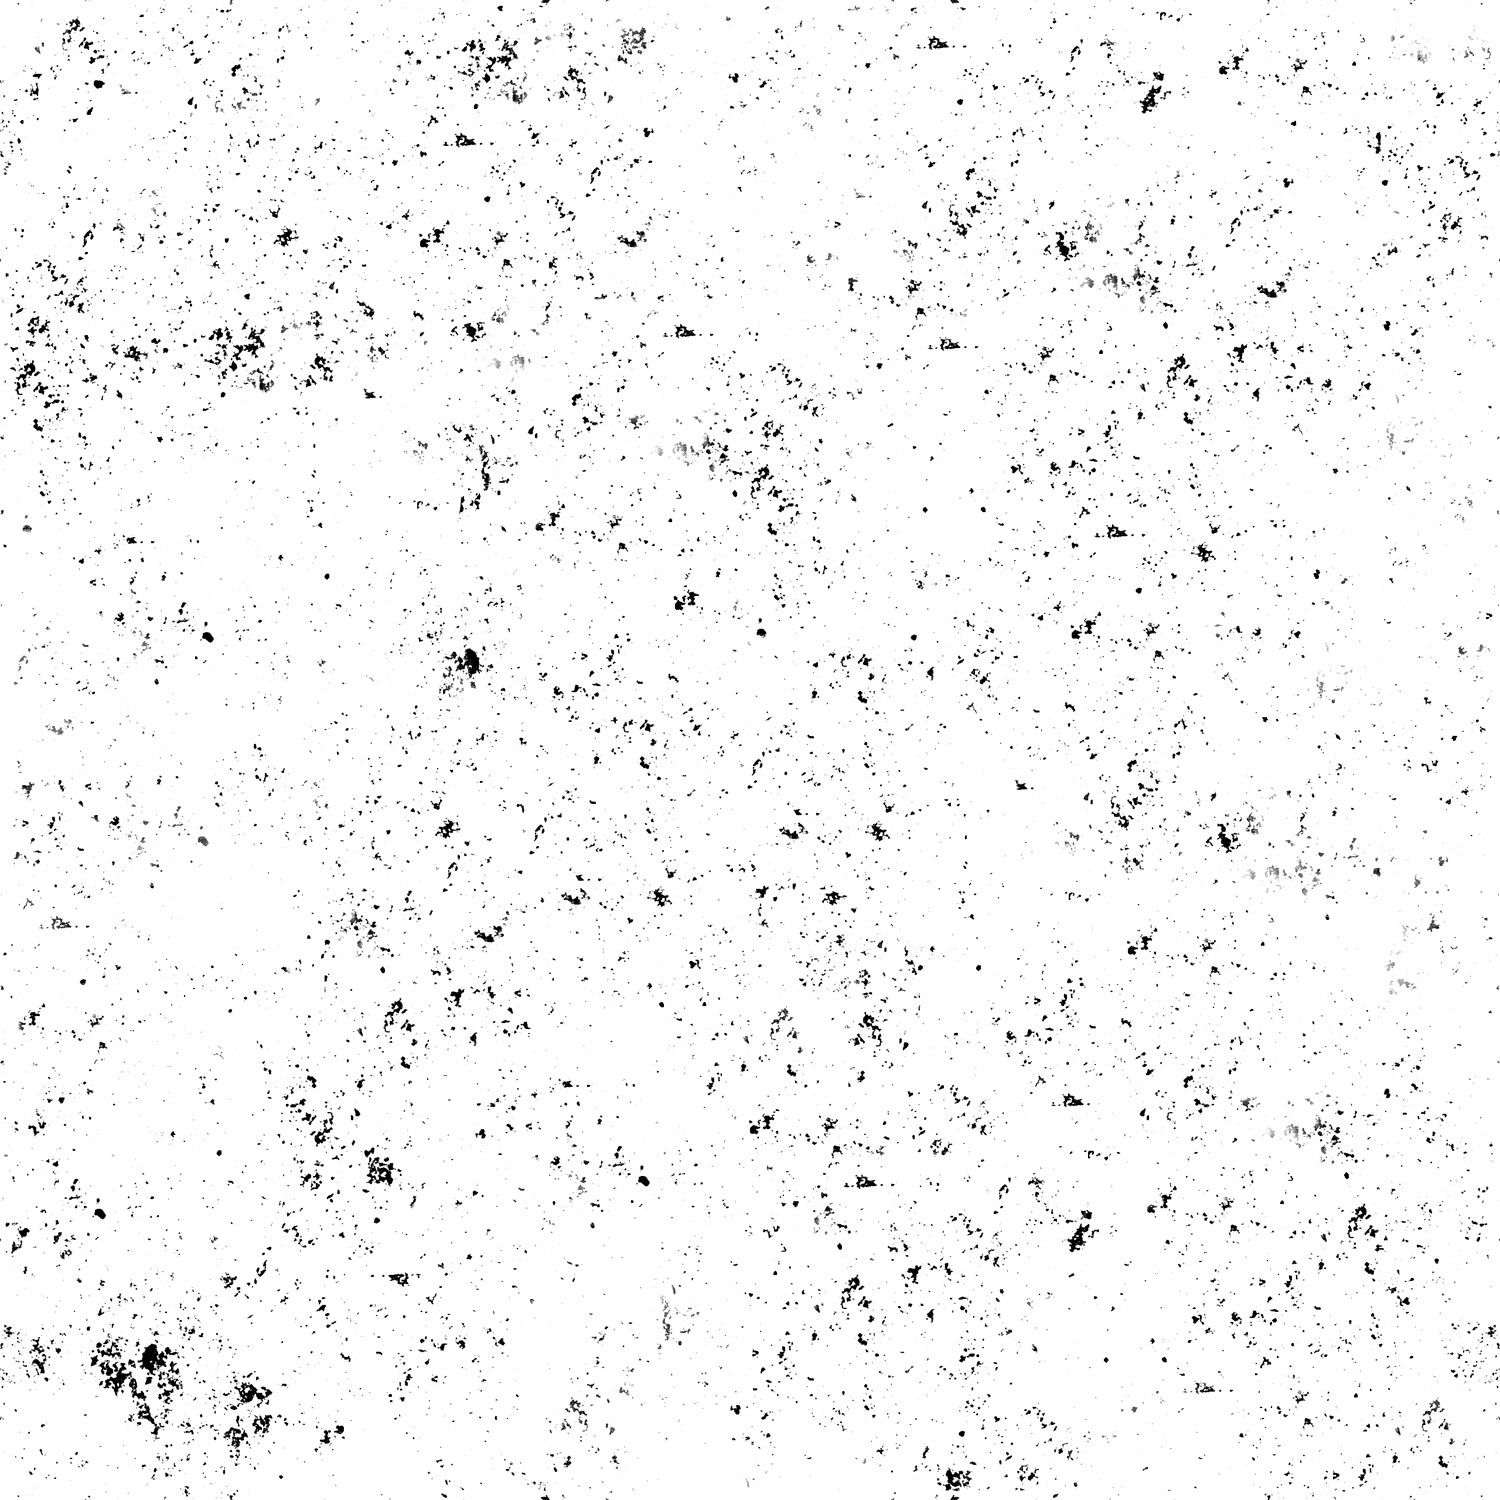 bjotto dirtmap random noise .search for bjotto to see more dirtmaps